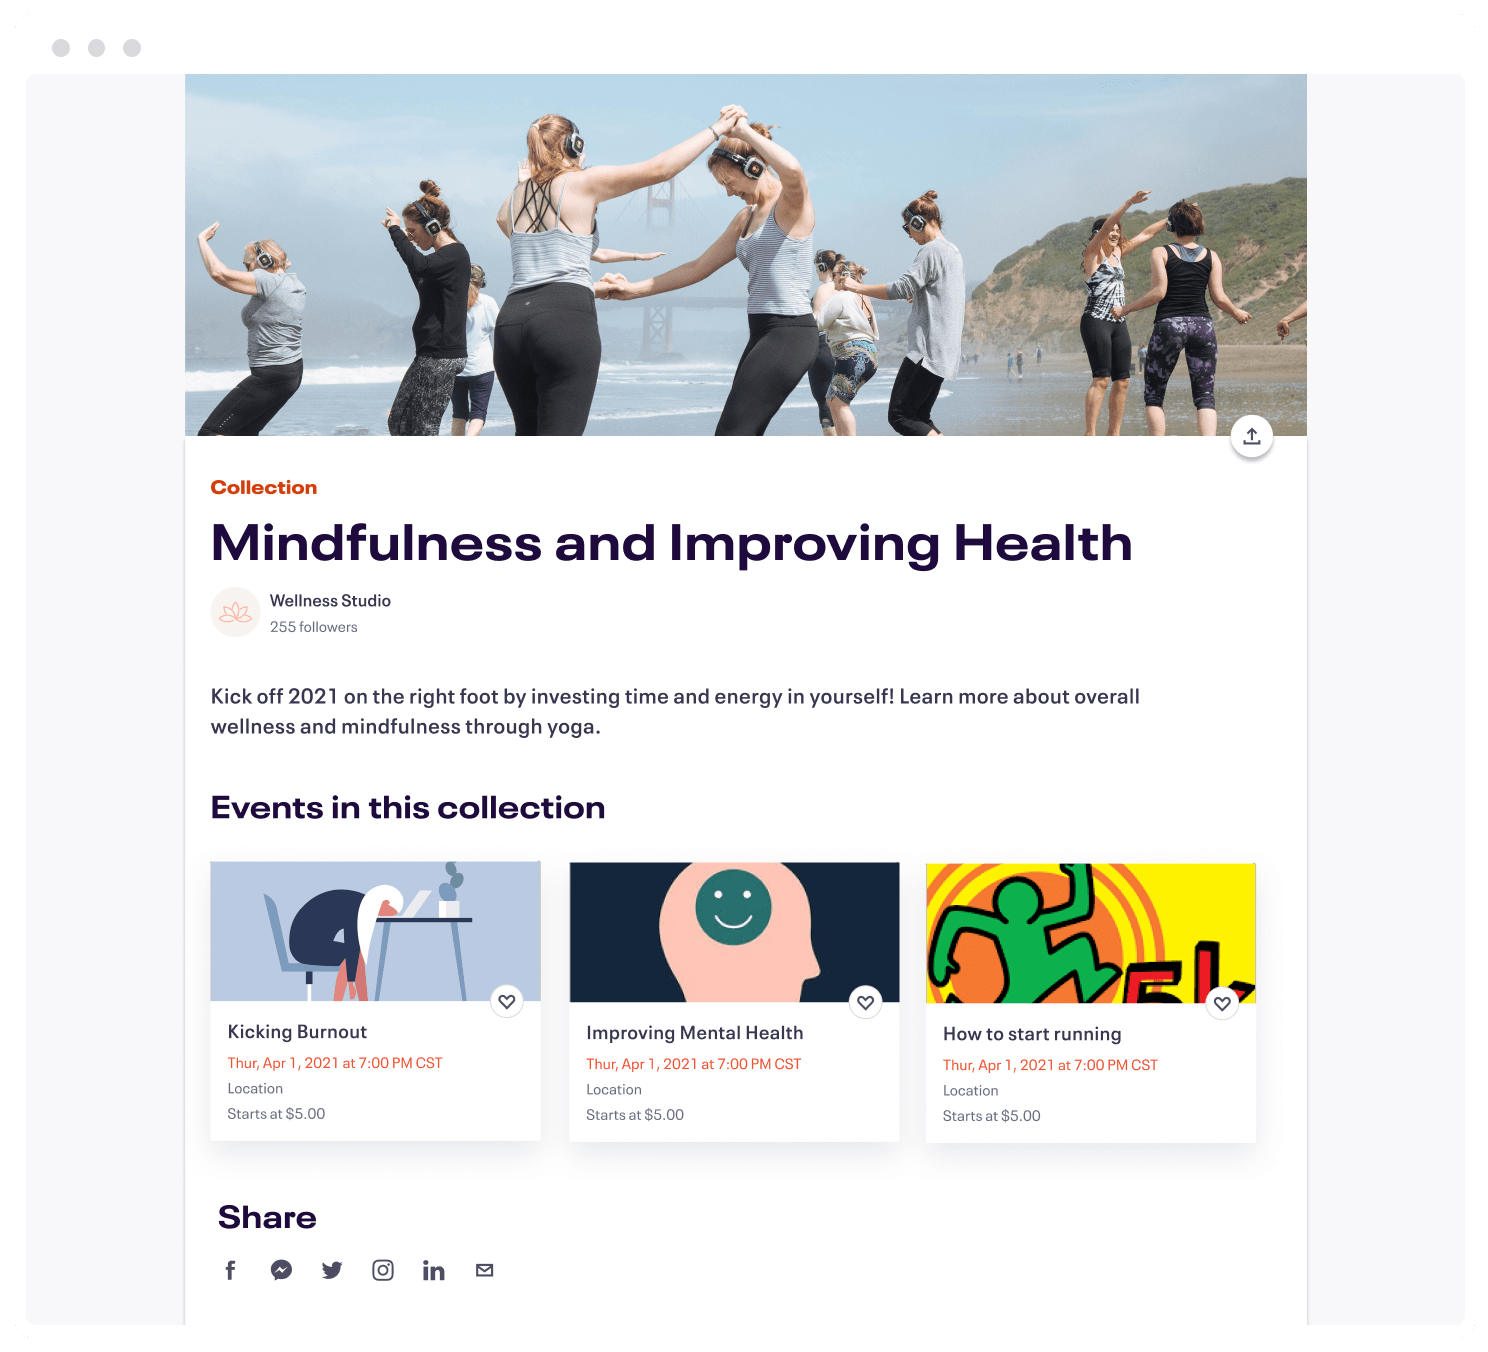 This is a screenshot of the Collections page to serve as an example. The images featured are a range of events focussing on mindfulness and health.